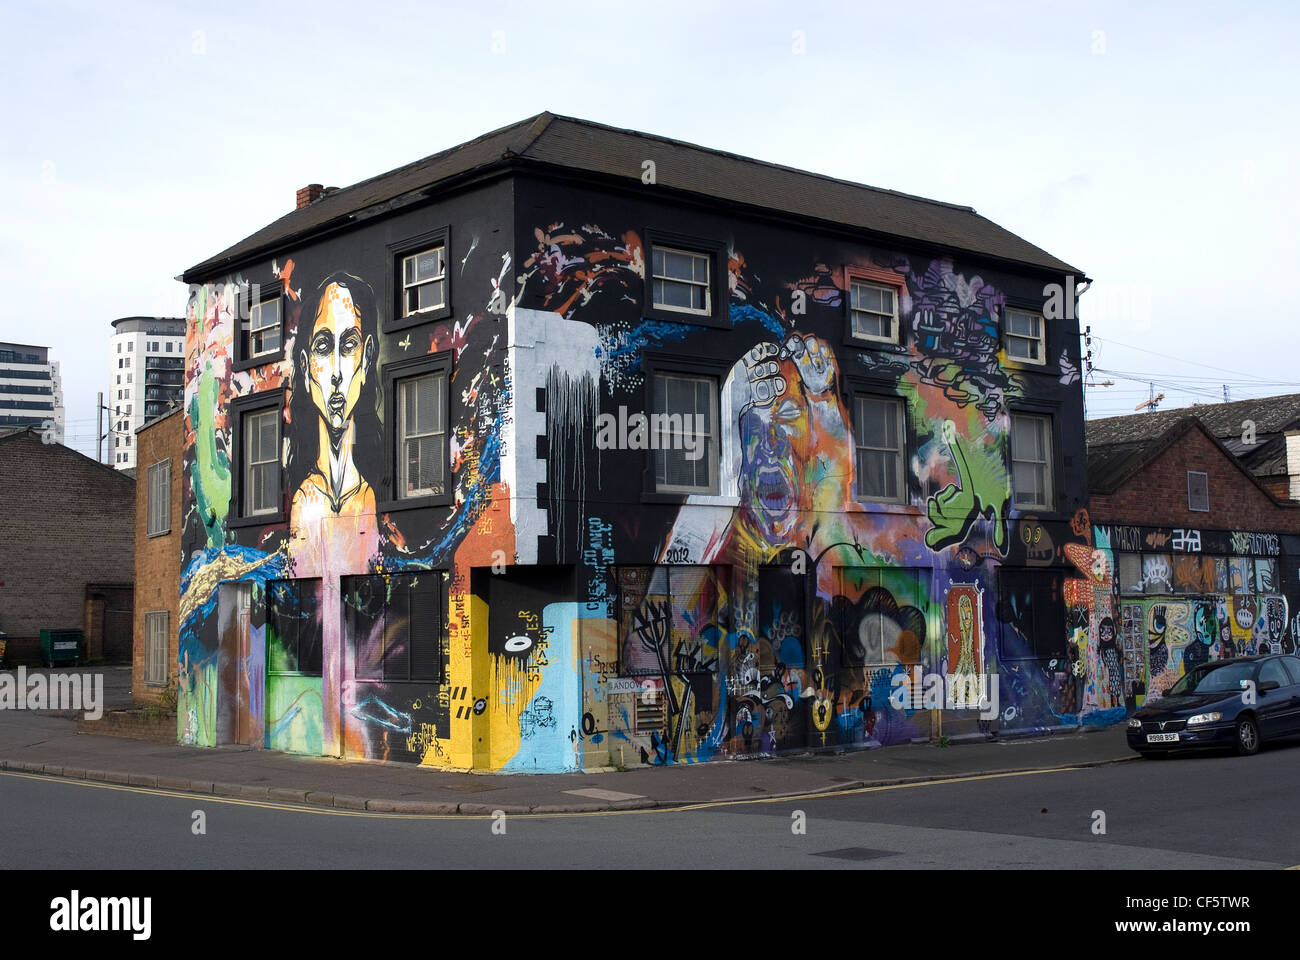 A building on a street corner in Birmingham covered in graffiti. Stock Photo